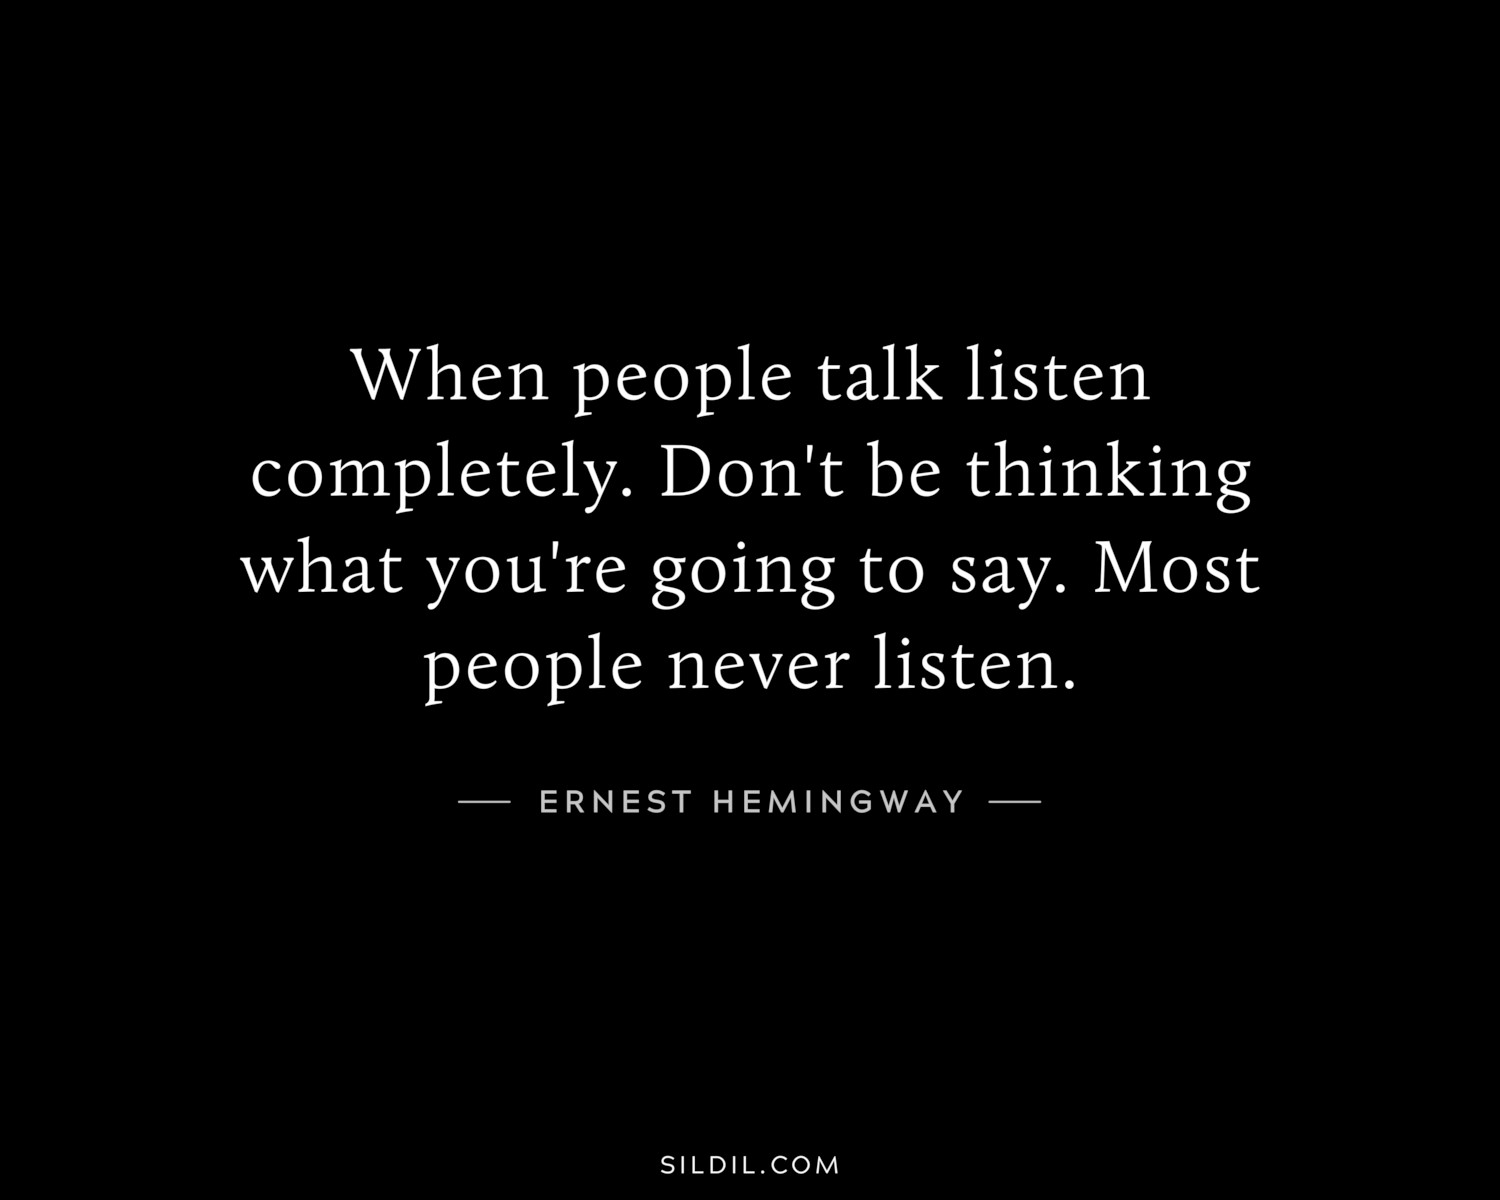 When people talk listen completely. Don't be thinking what you're going to say. Most people never listen.